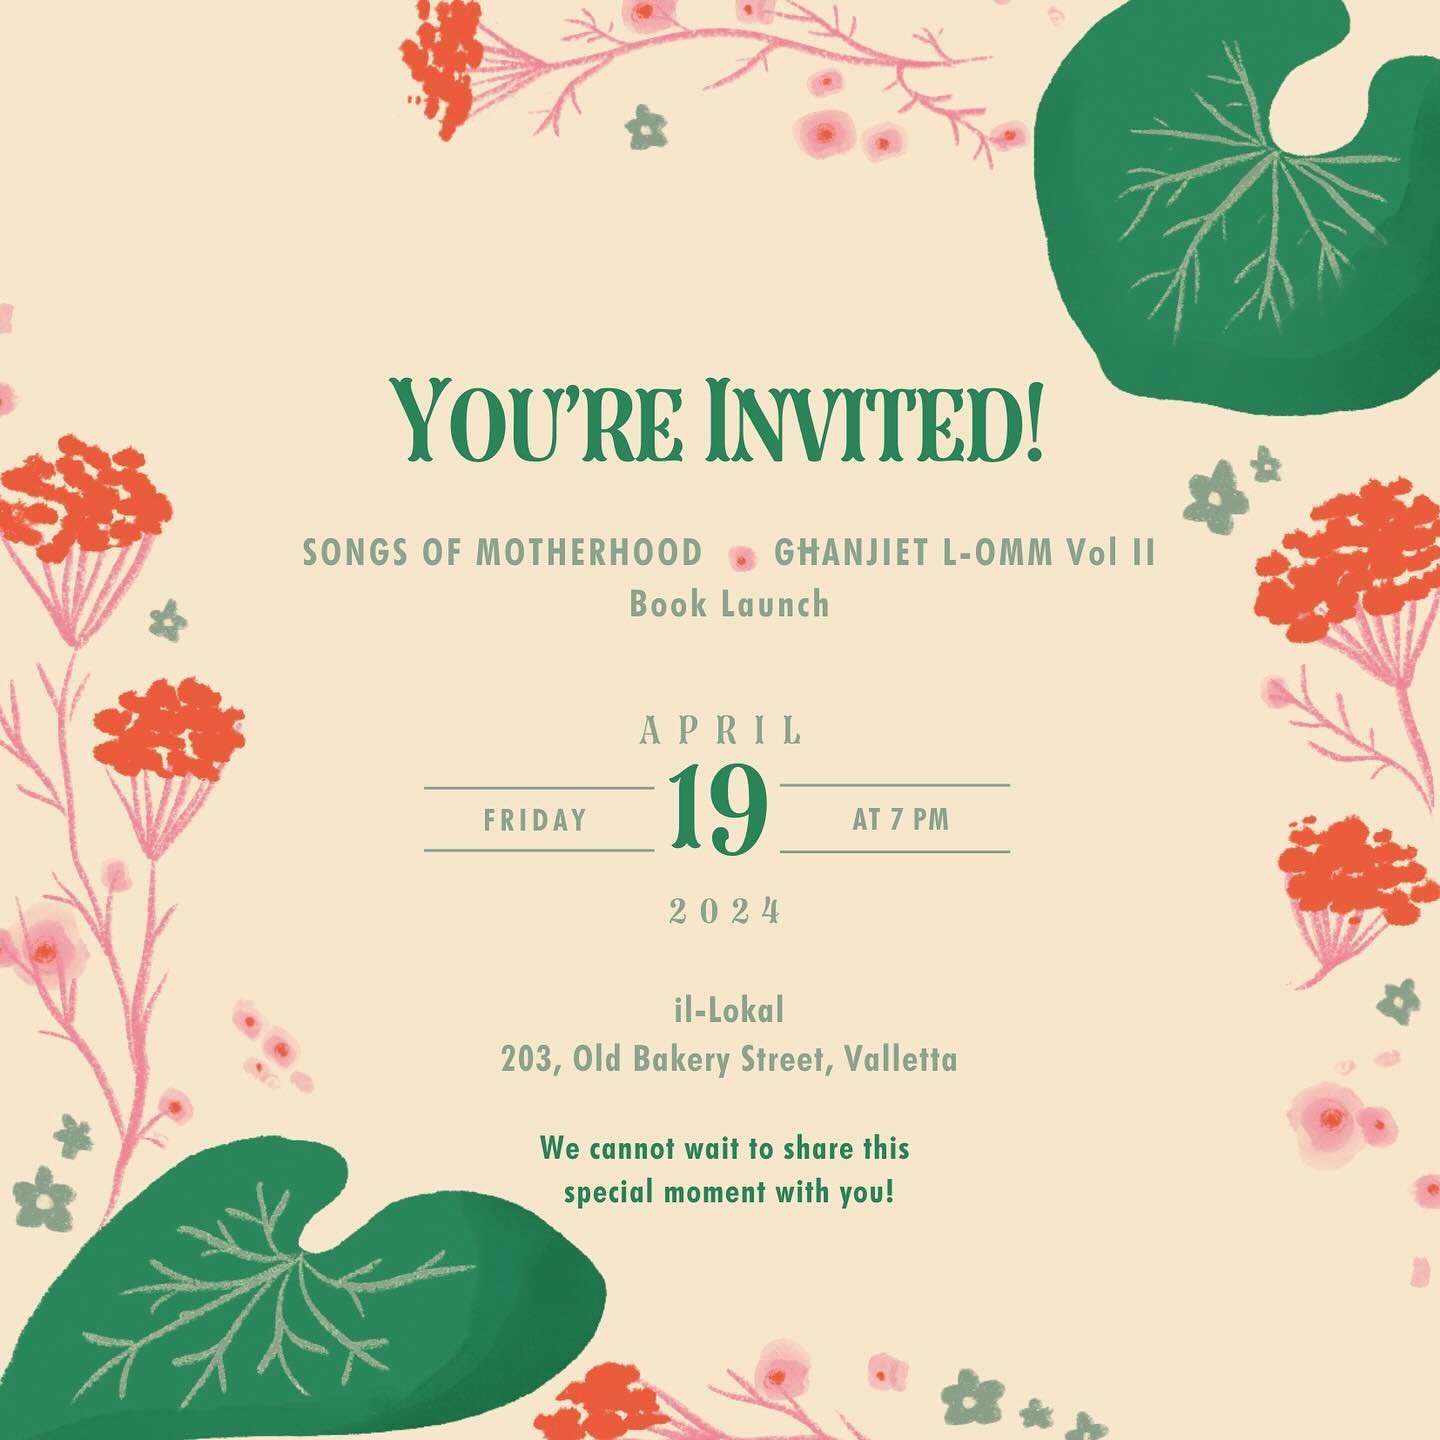 🌿 Come one, come all! Join us as we celebrate the launch of the second volume of Songs of Motherhood - Għanjiet l-Omm at @il_lokal, a wonderful treasure trove of Made in Malta products. Have some bubbly, meet the lovely contributors and hear a coupl